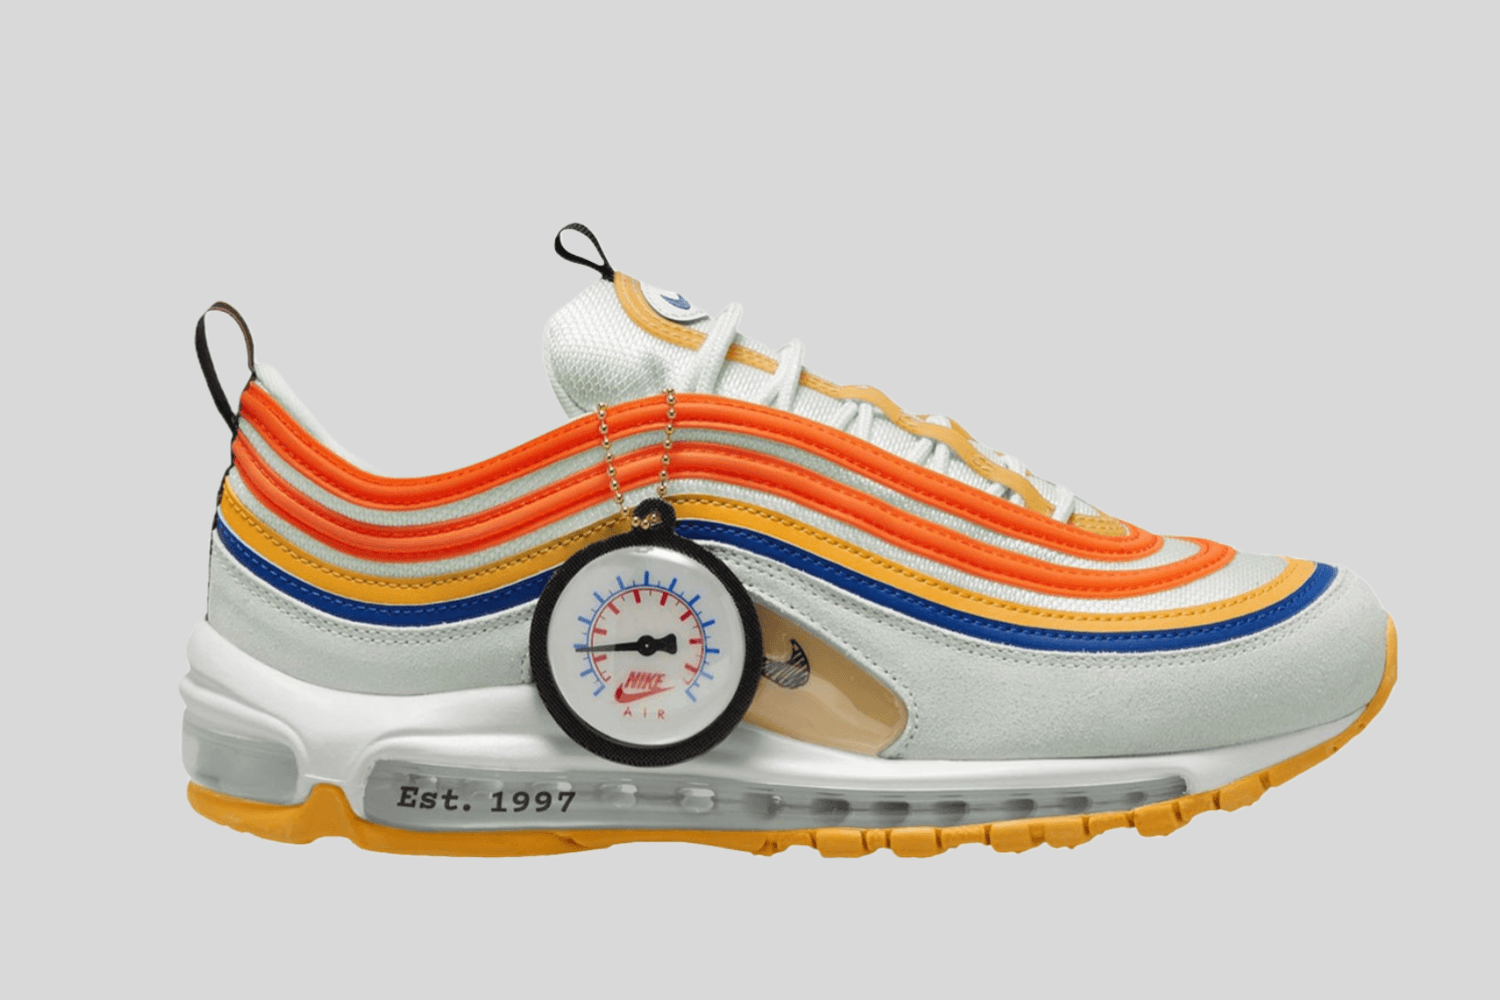 Nike introduces the Air Max 97 'M. Frank Rudy'